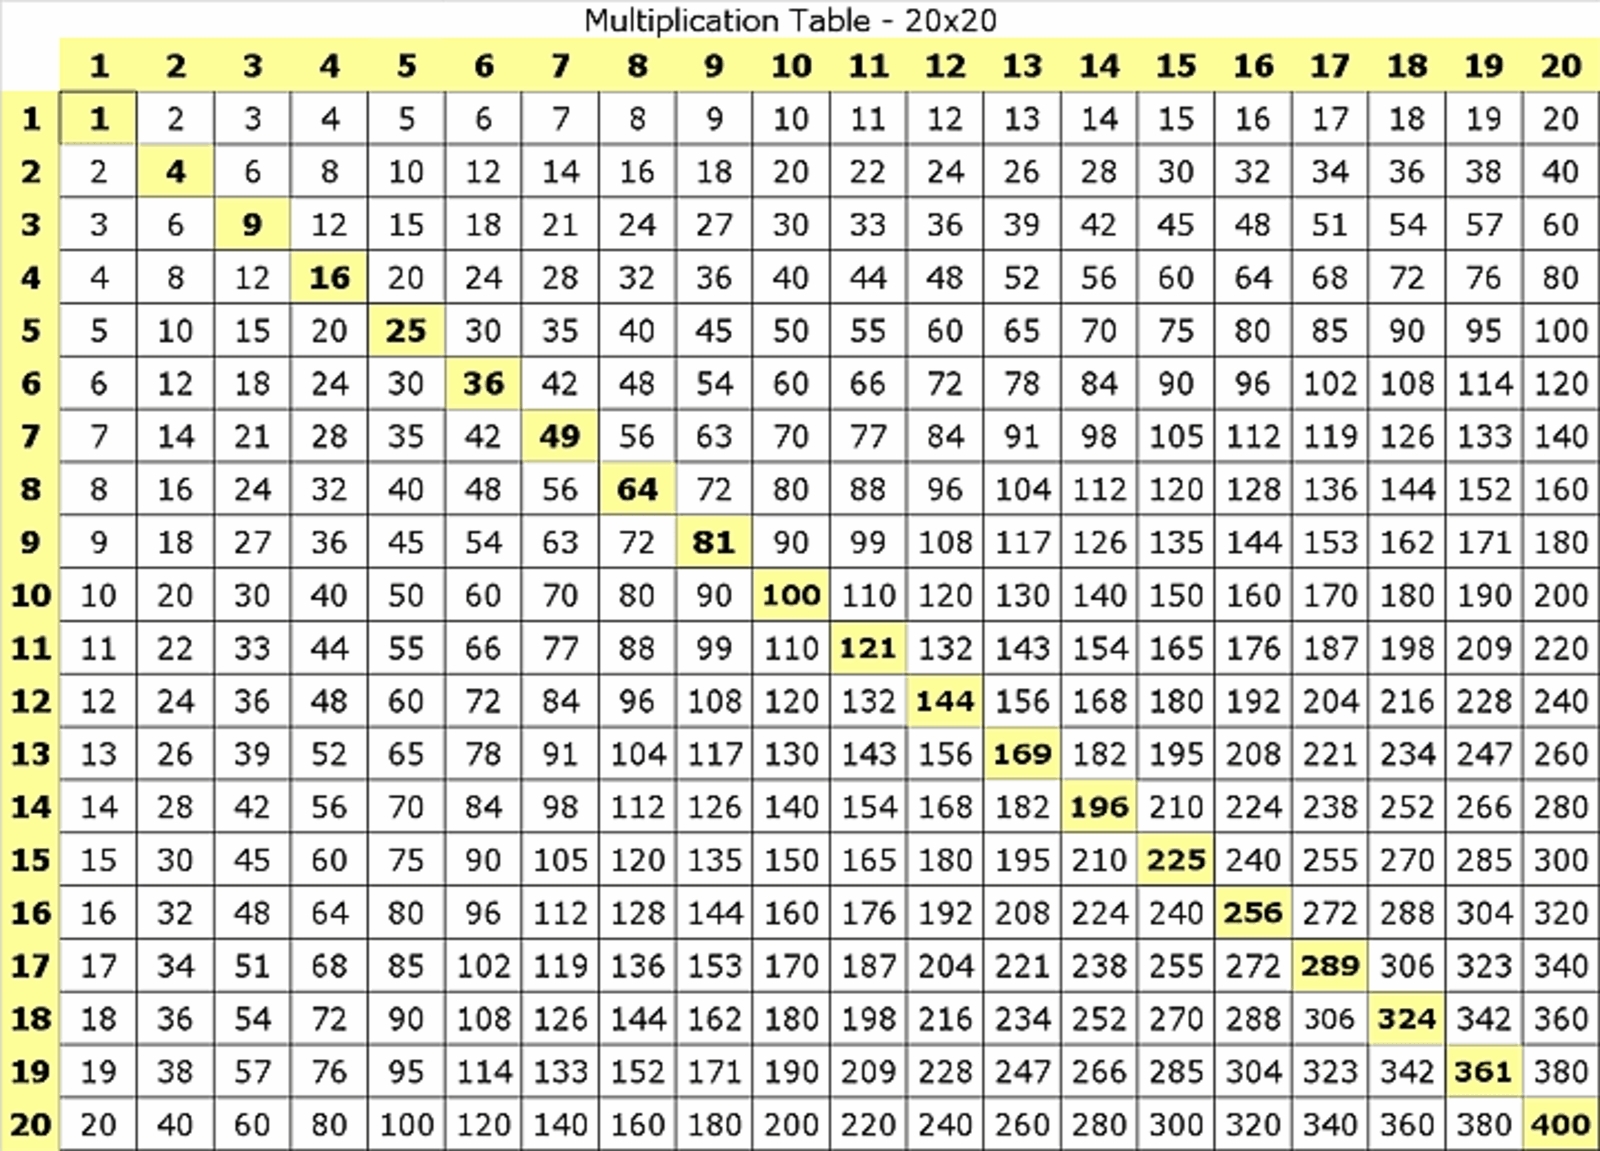 times-table-chart-1-15-chart-within-multiplication-table-1-100-2020